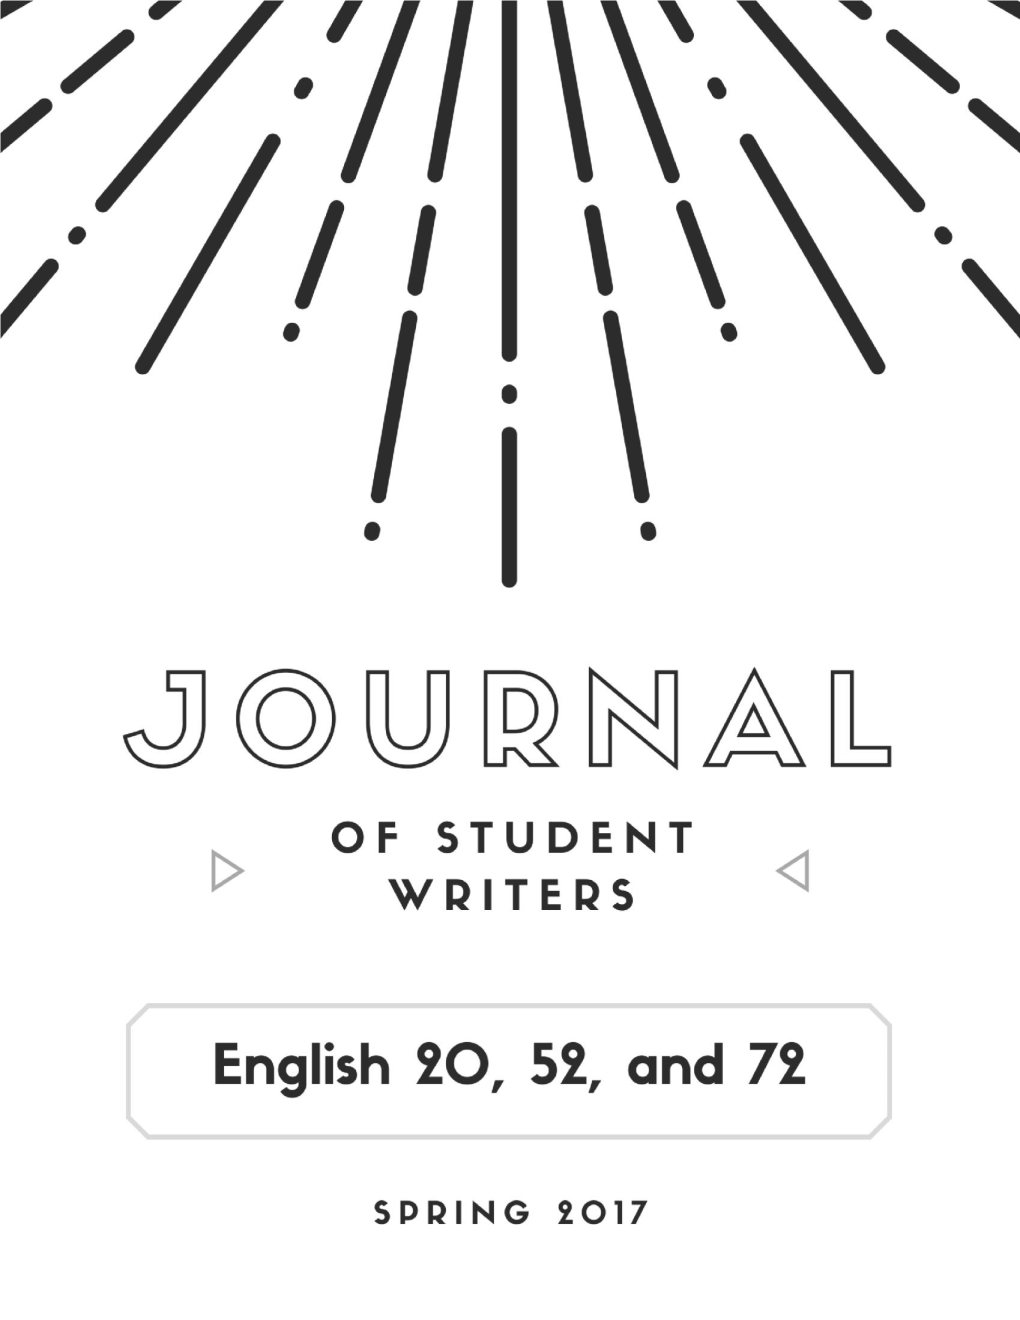 Journal of Student Writers, Spring 2017